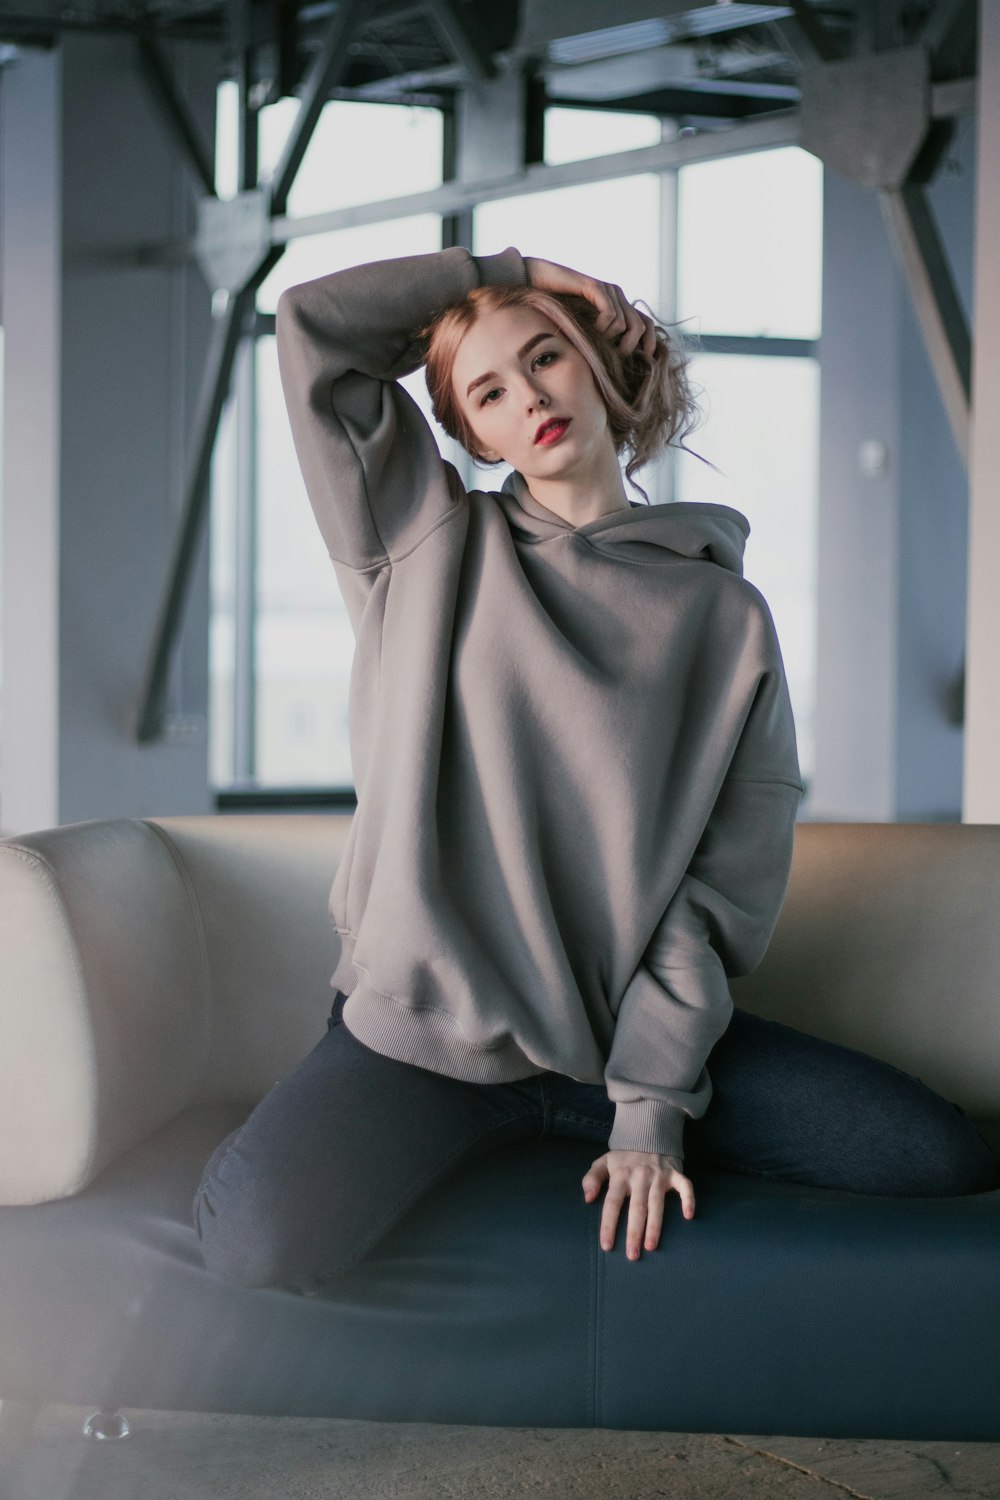 woman in gray hoodie and black pants sitting on gray couch